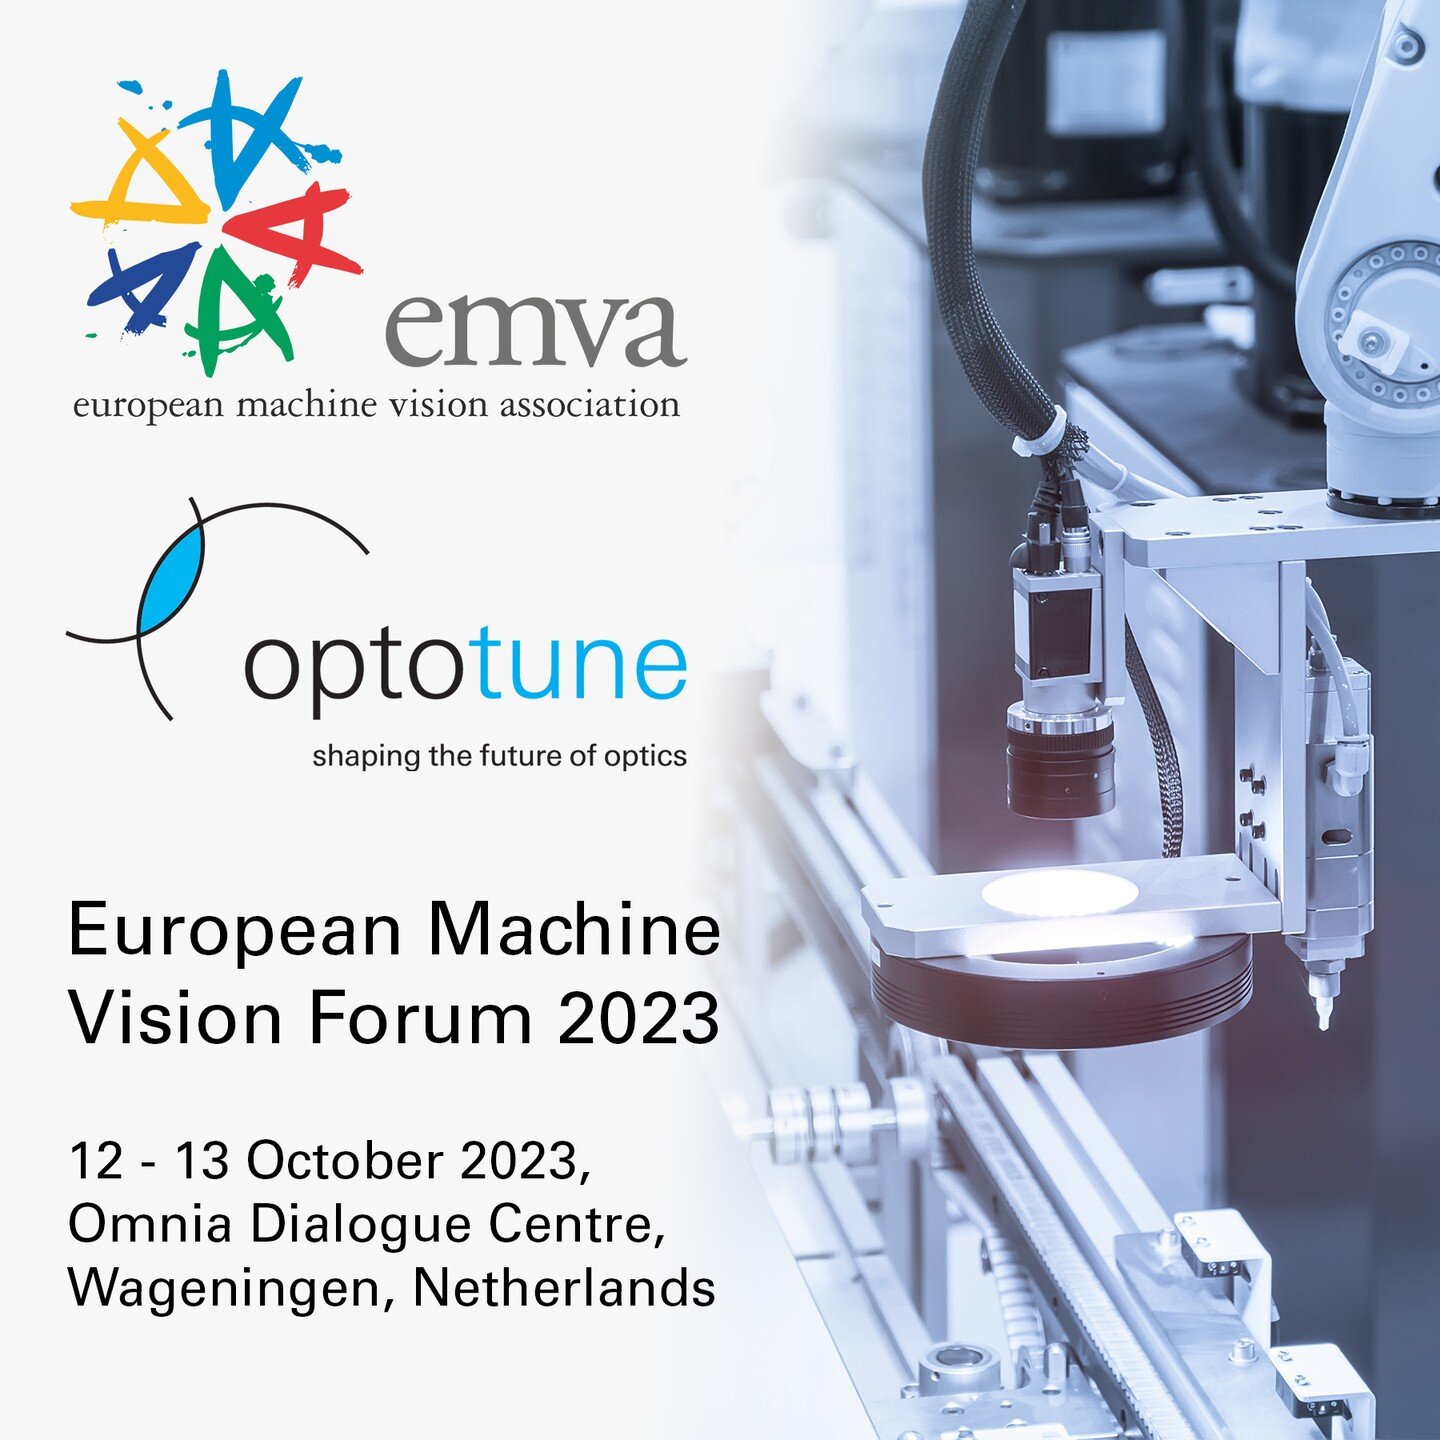 European Machine Vision Forum 2023 | Where Research Meets Industry | Real-world Machine Vision Challenges | Coping with Variability and Uncontrolled Environments
12 - 13 October 2023 | Omnia Dialogue Centre, Wageningen, Netherlands

Optotune will be 